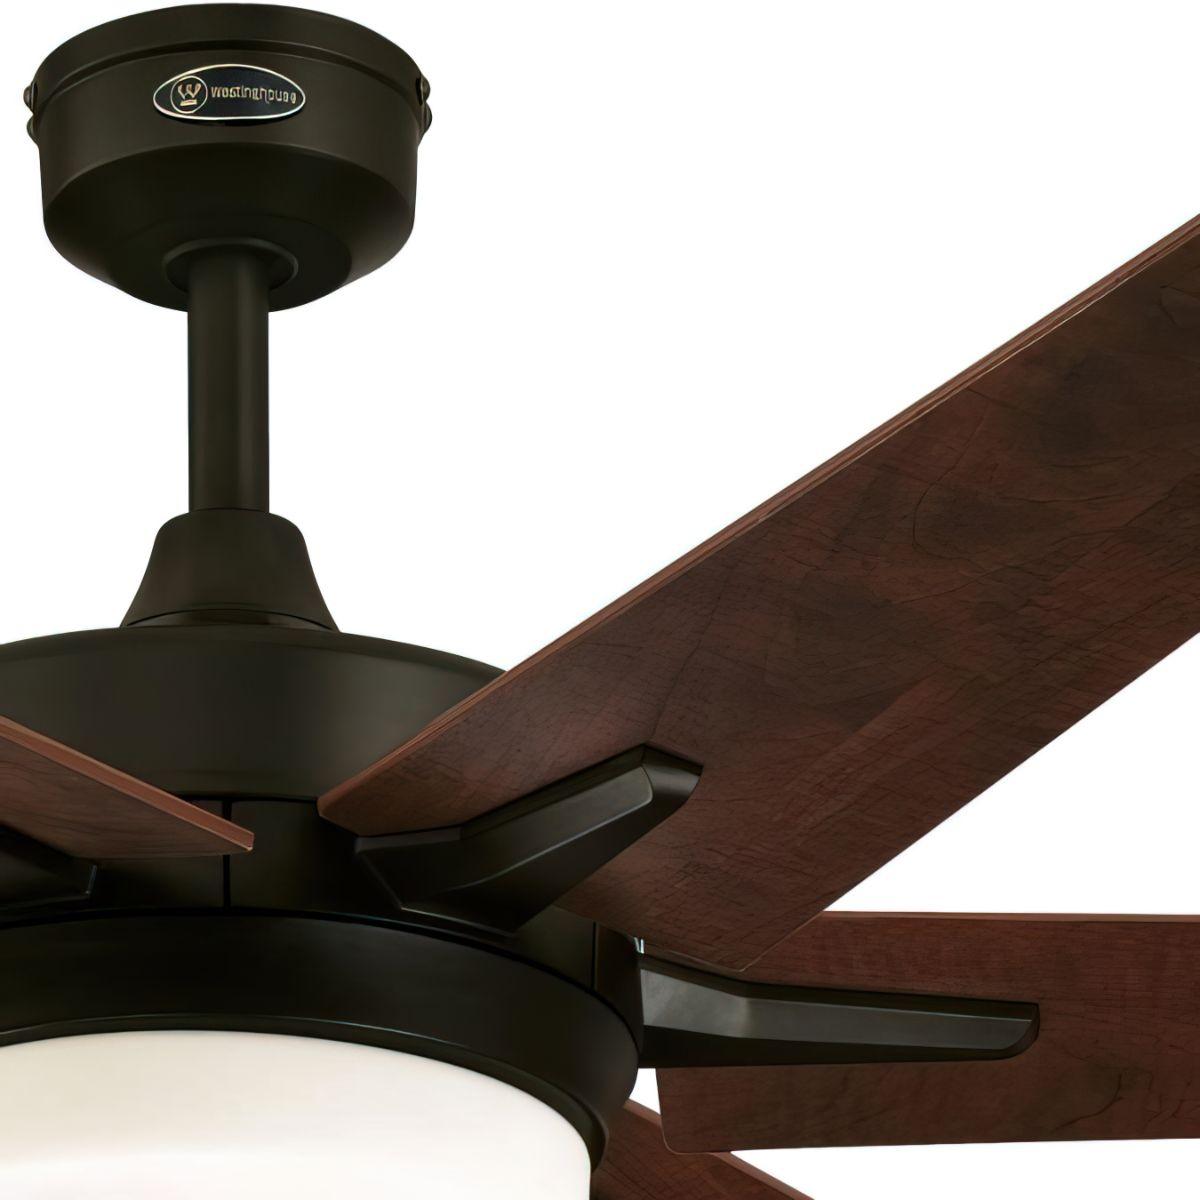 Cayuga 60 Inch Windmill Ceiling Fan With Light And Remote, 6 Blades